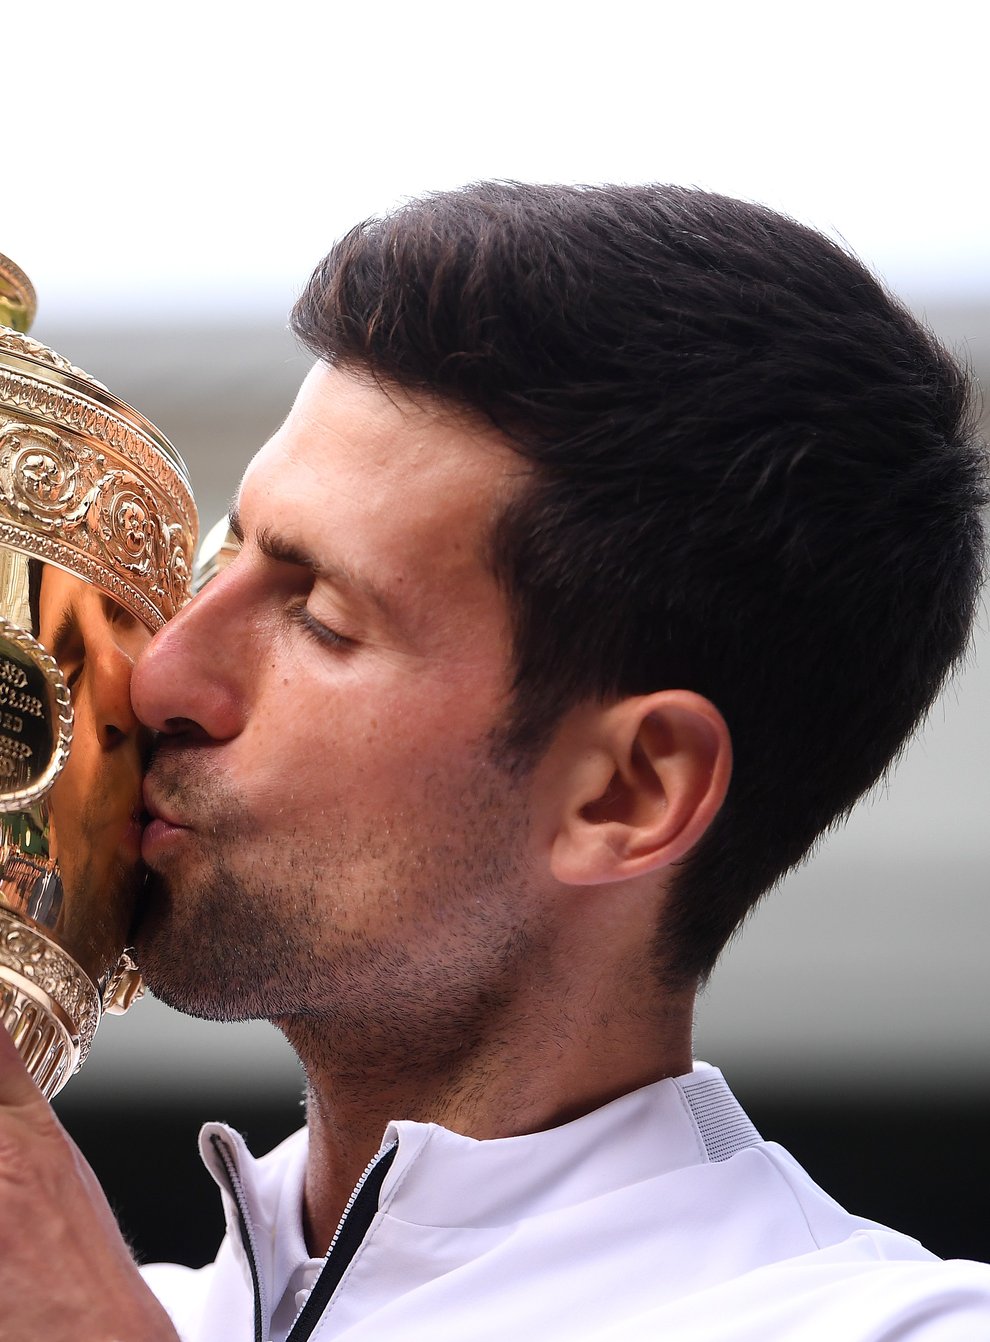 Novak Djokovic will be back at Wimbledon aiming for a sixth title